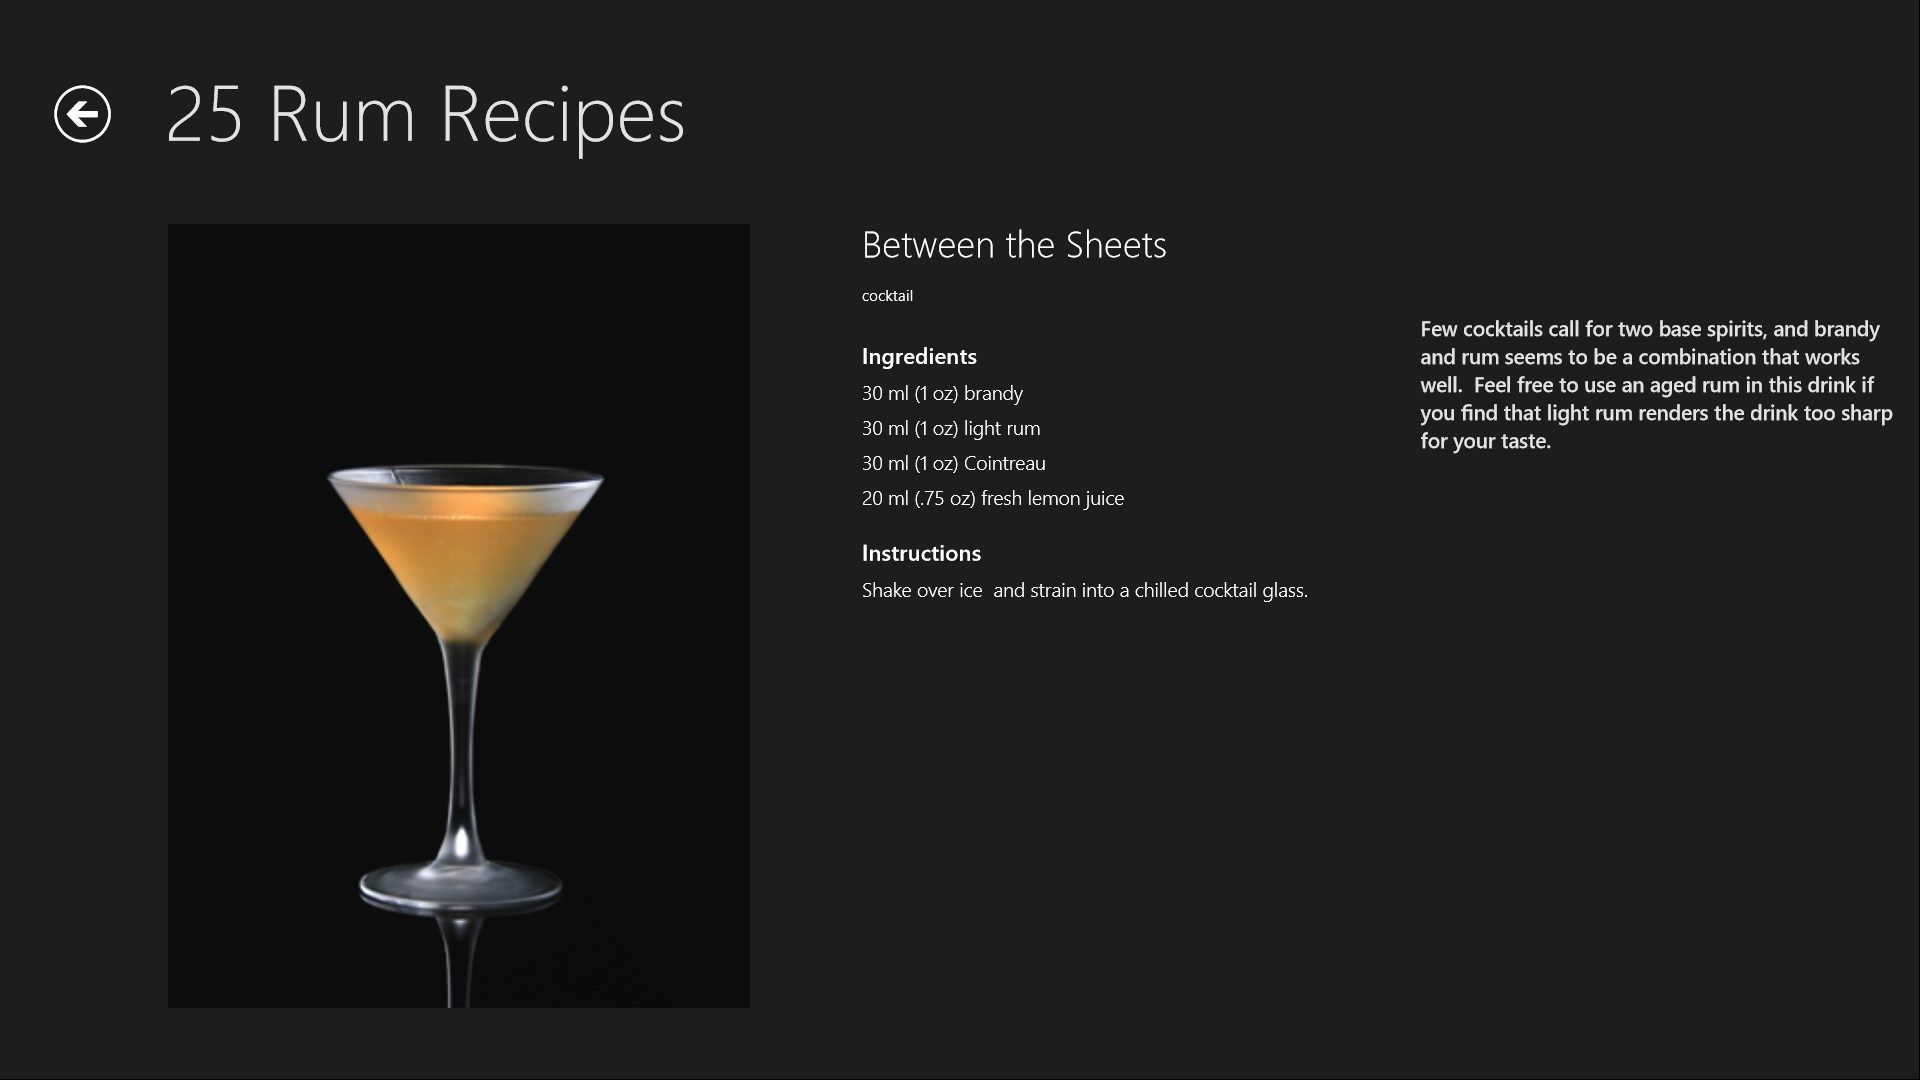 For each cocktail, view a large hi-def image, ingredients list and directions